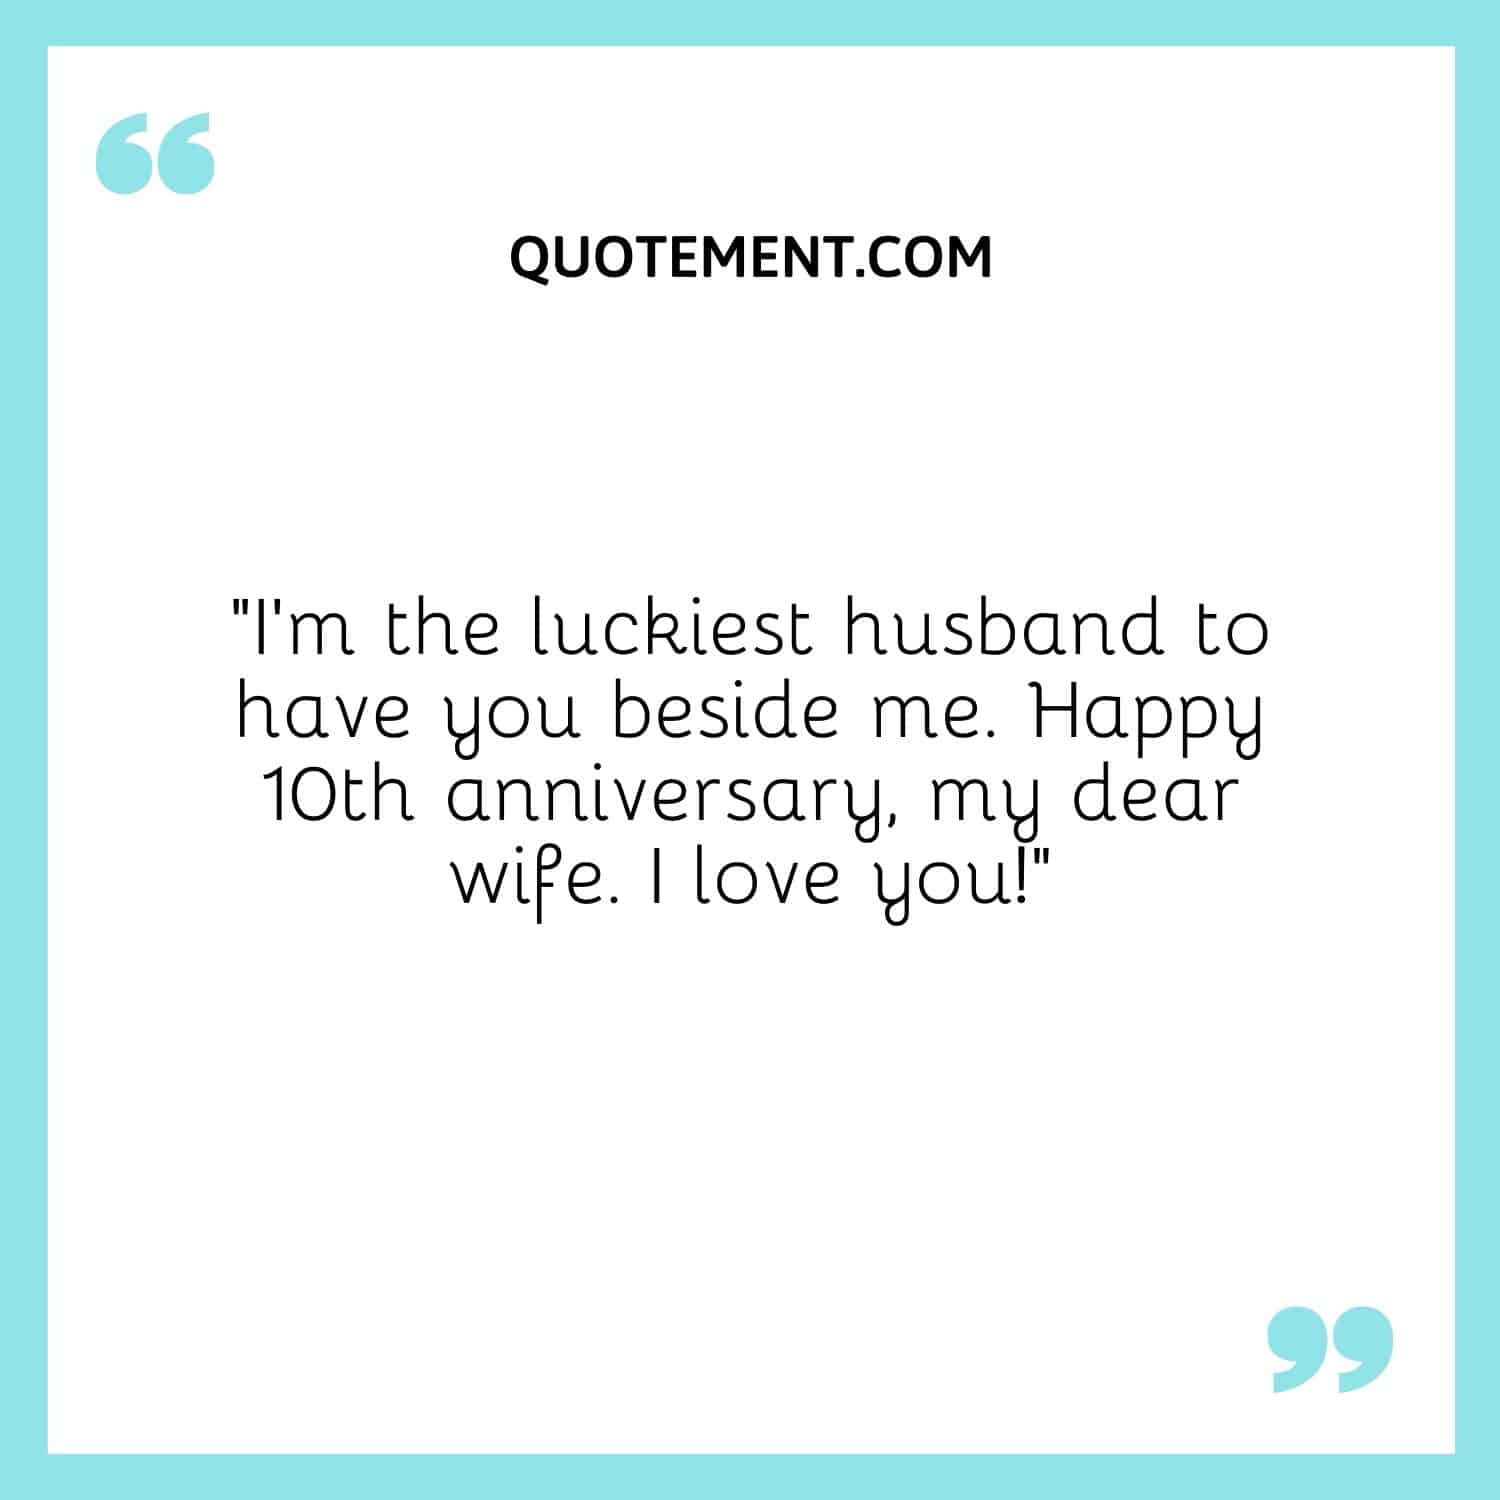 I’m the luckiest husband to have you beside me